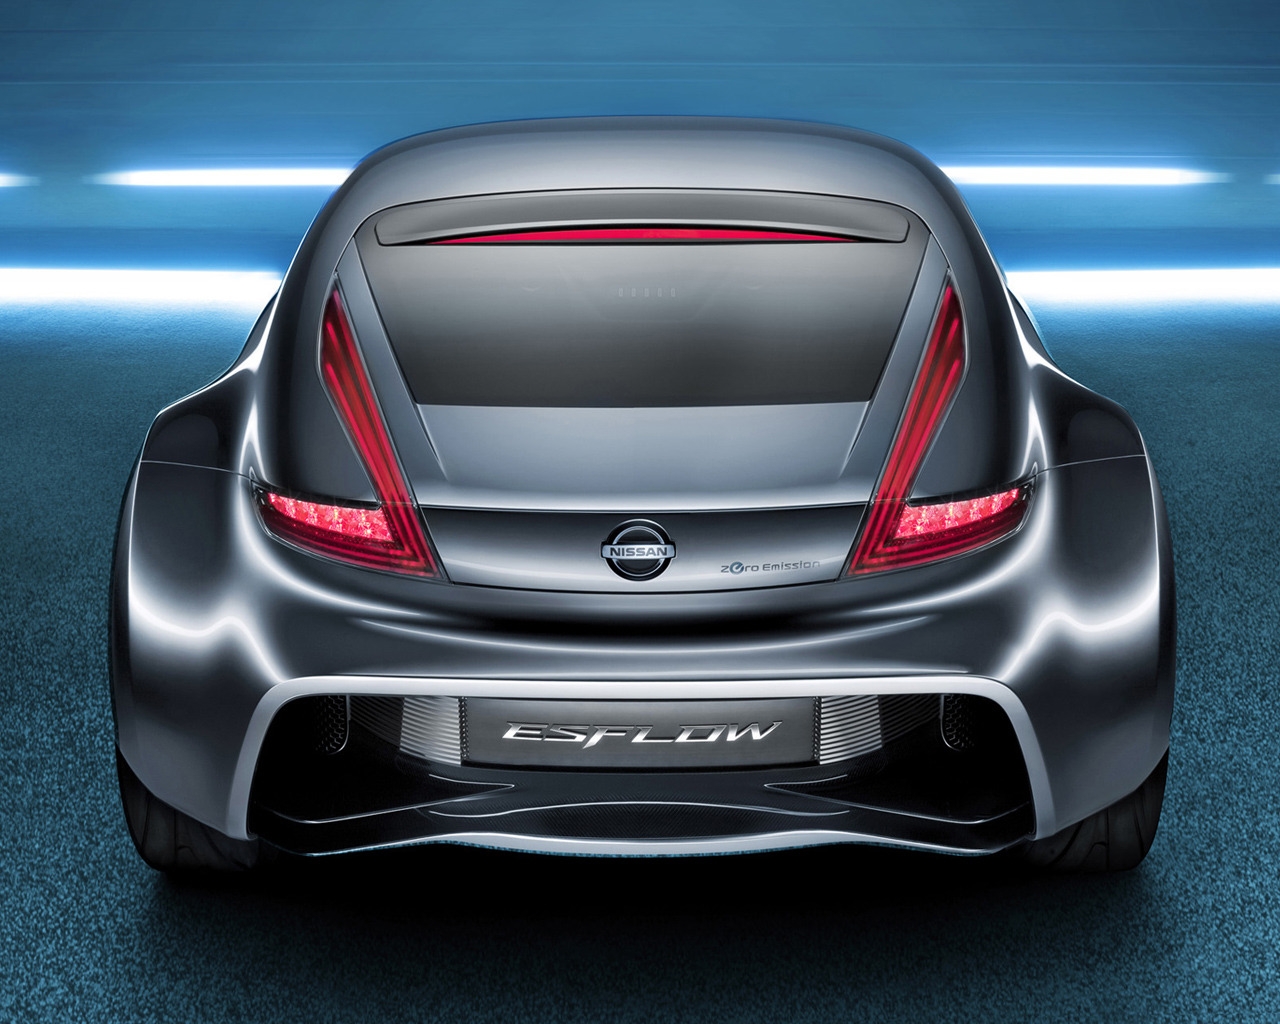 Nissan Esflow Concept Rear for 1280 x 1024 resolution